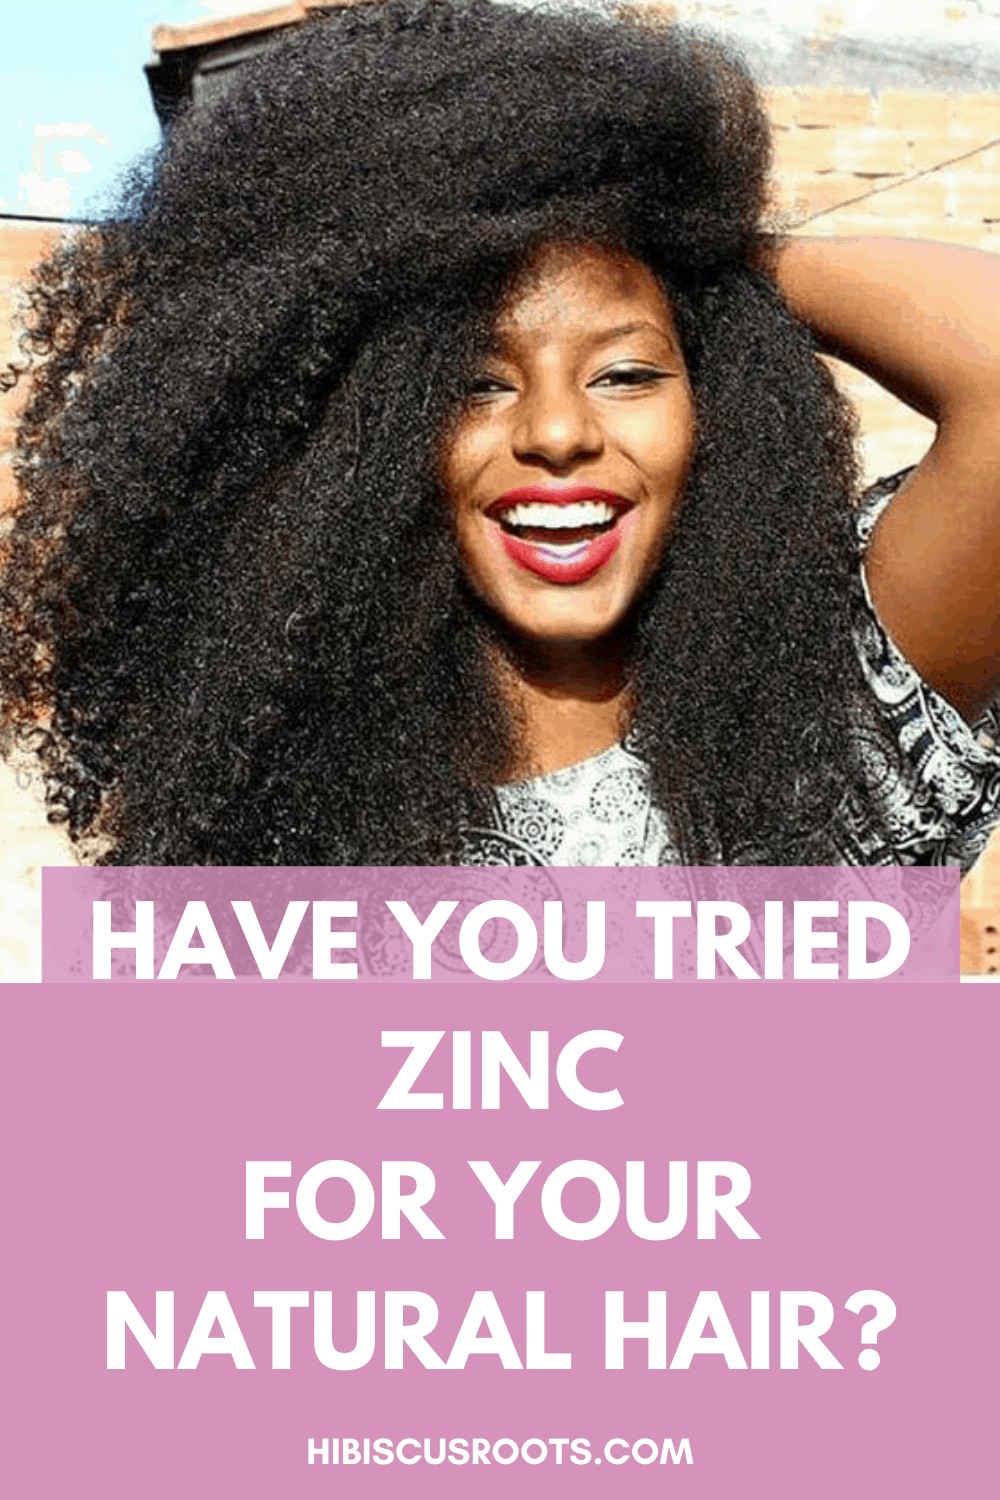 How Zinc Can Drastically Change Your 4C Natural Hair!